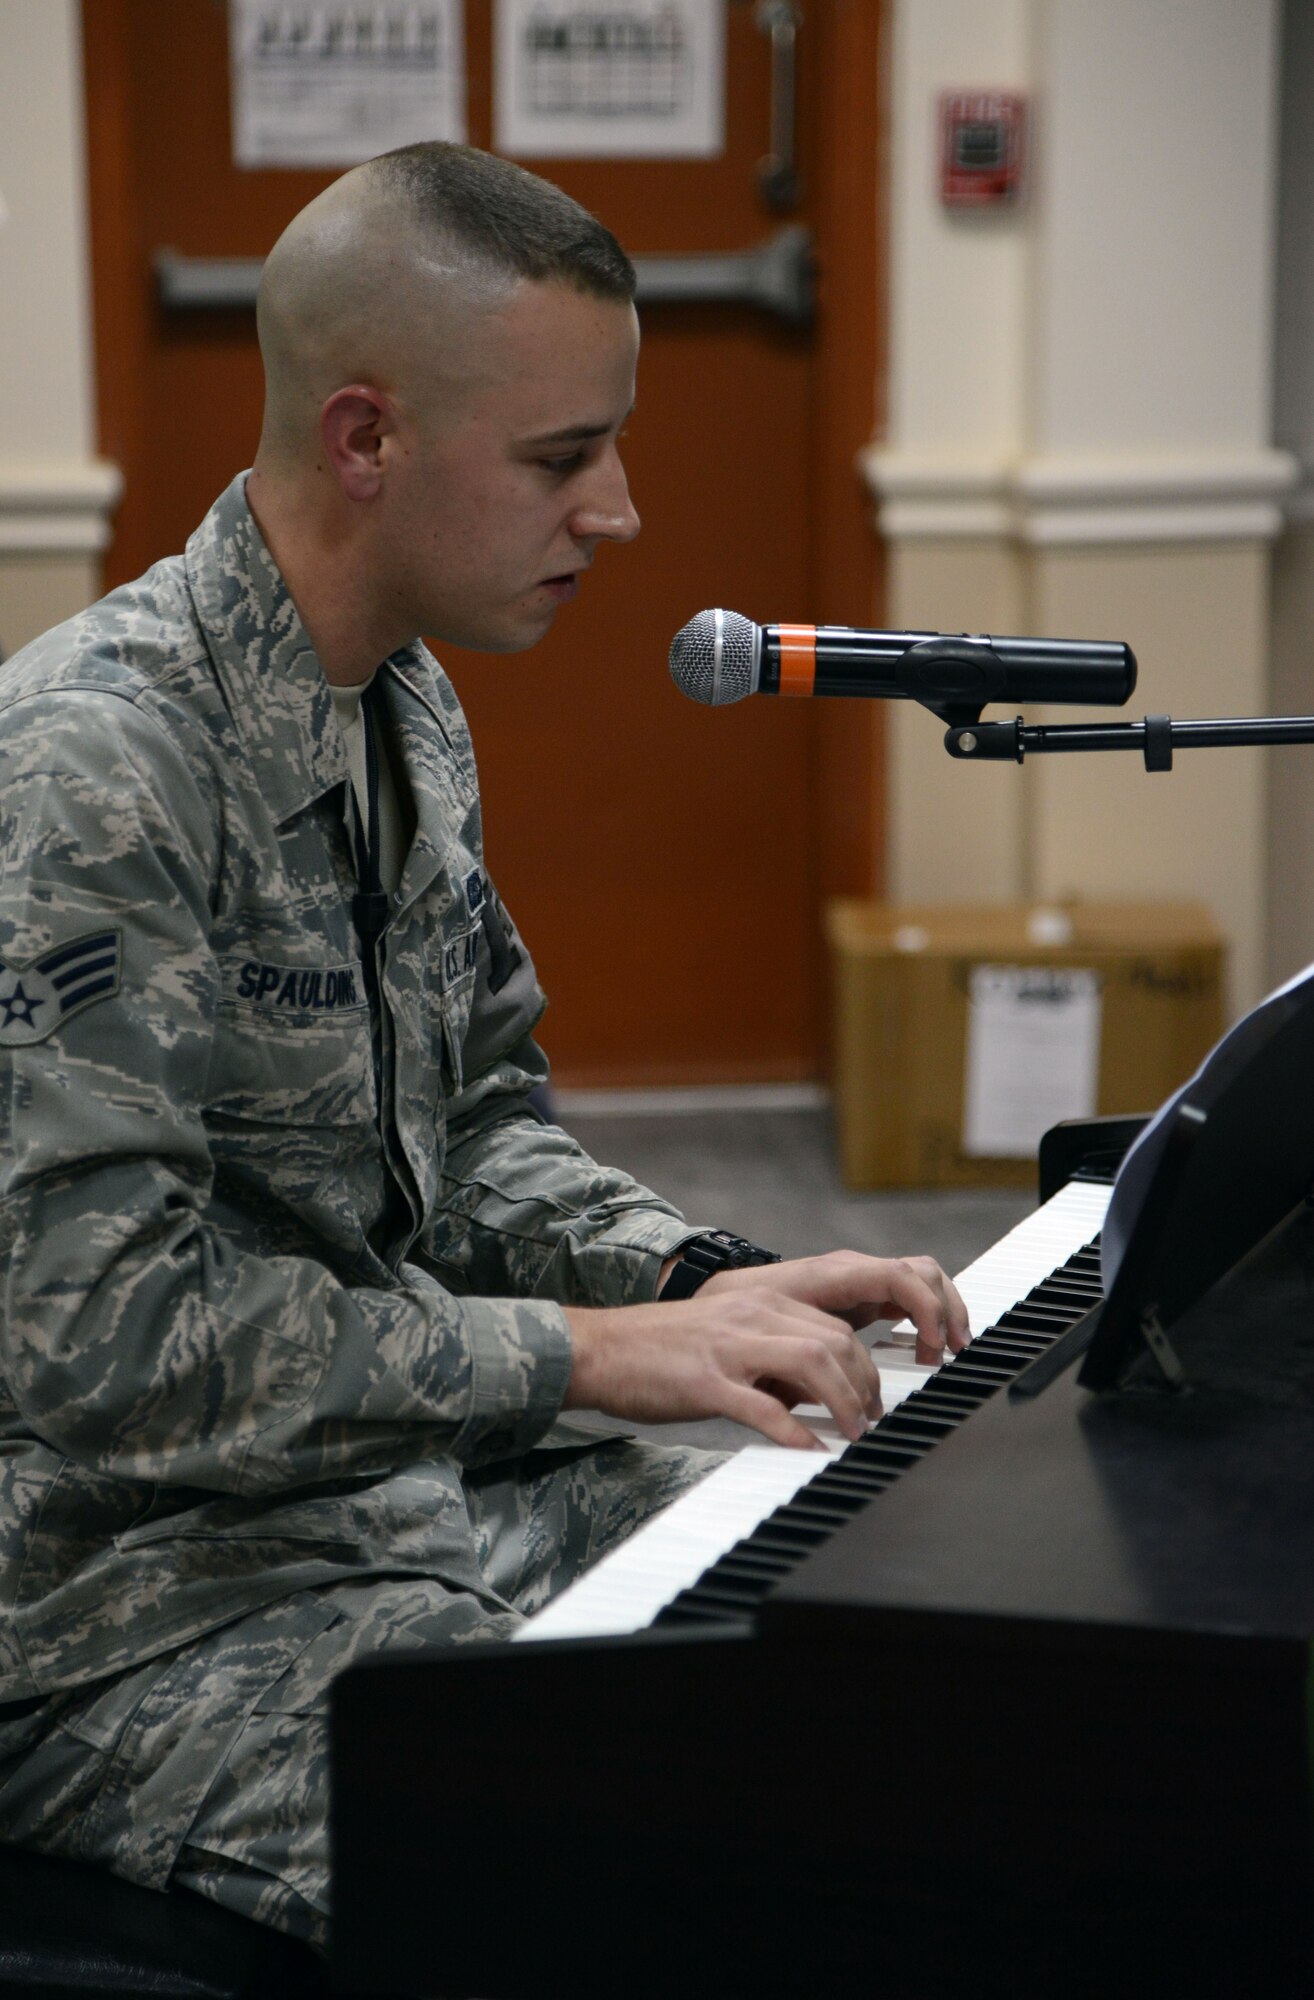 SOUTHWEST ASIA - Senior Airman Landon Spaulding, 386th Expeditionary Civil Engineer Squadron, plays piano and sings during a chapel-sponsored talent showcase Nov. 21, 2014. Marauders used music, poetry and other talents to show their thanks during the holiday season. (U.S. Air Force photo by Tech. Sgt. Jared Marquis/released)